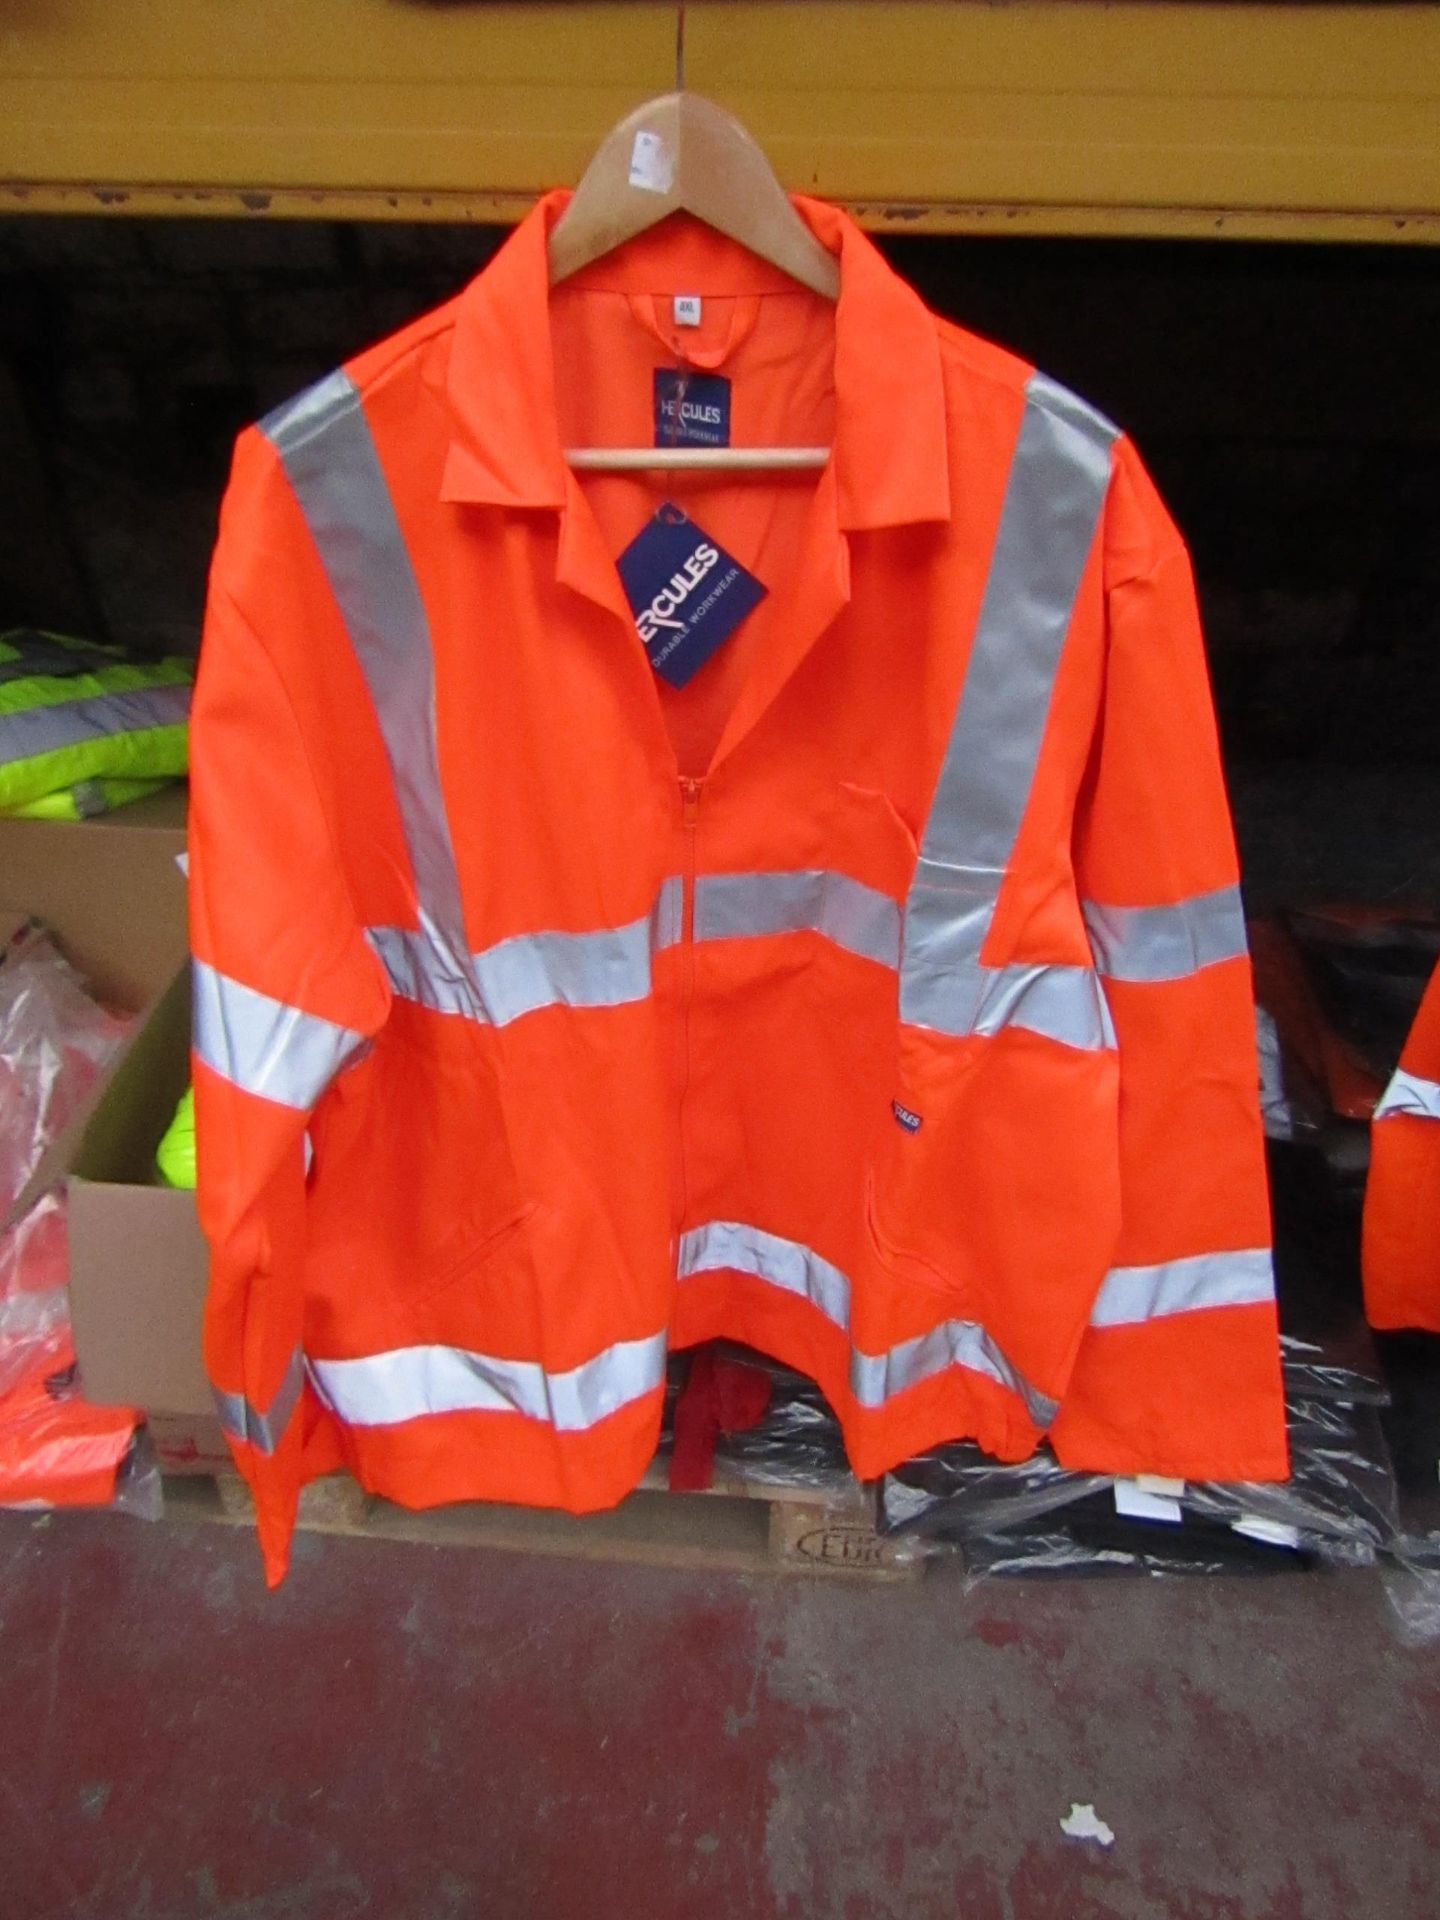 Hercules orange polycotton hi vis jacket, size 4XL, new and packaged.